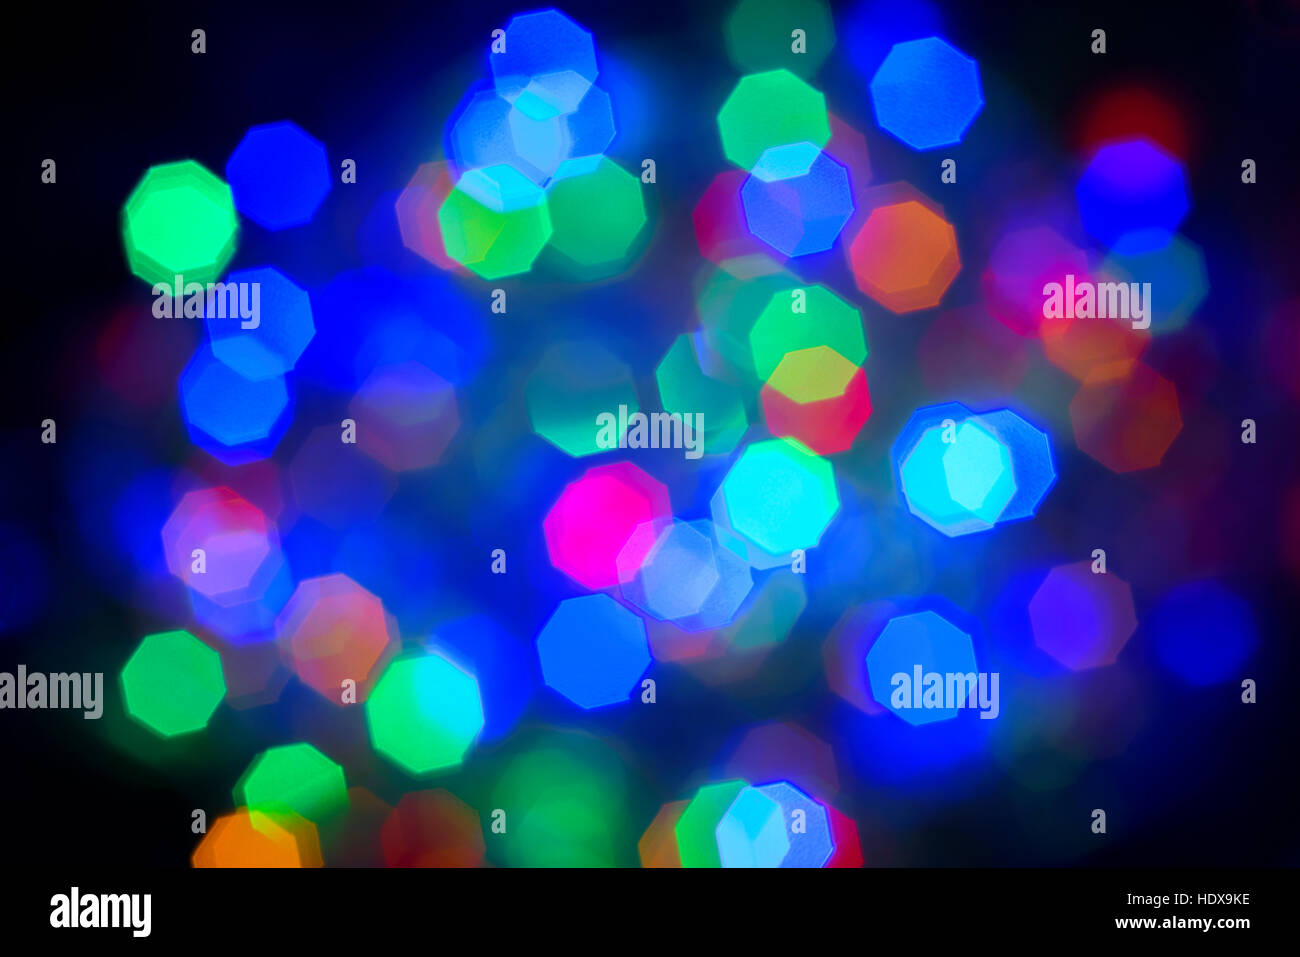 Defocussed Christmas colourful lights. Stock Photo